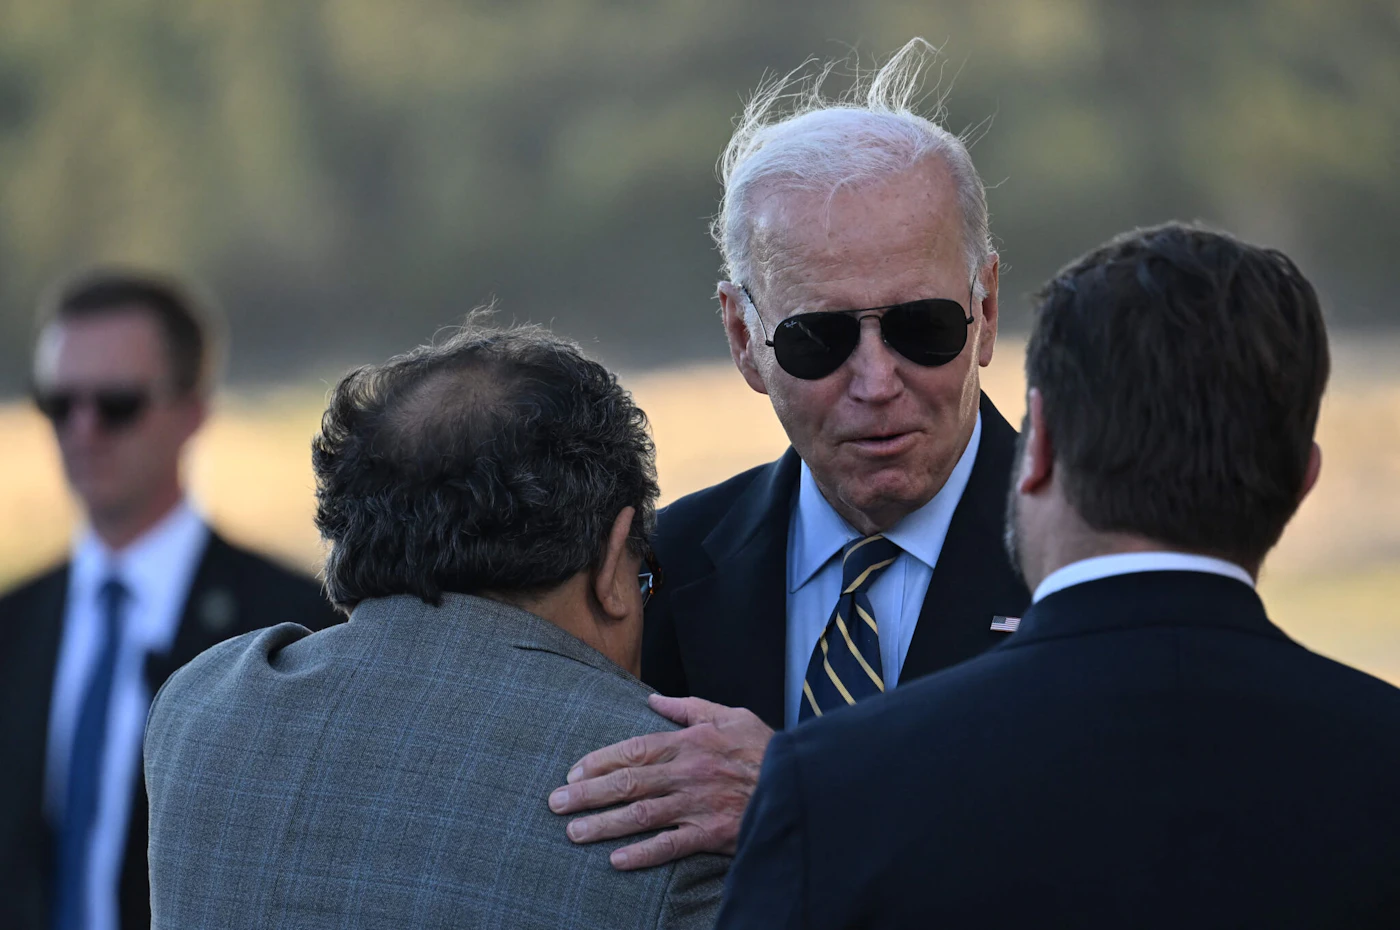 US President Joe Biden is greeted as he arrives at Grand Canyon National Park Airport in Grand Canyon Village, Arizona, on August 7, 2023. (Photo by Jim WATSON / AFP) (Photo by JIM WATSON/AFP via Getty Images)